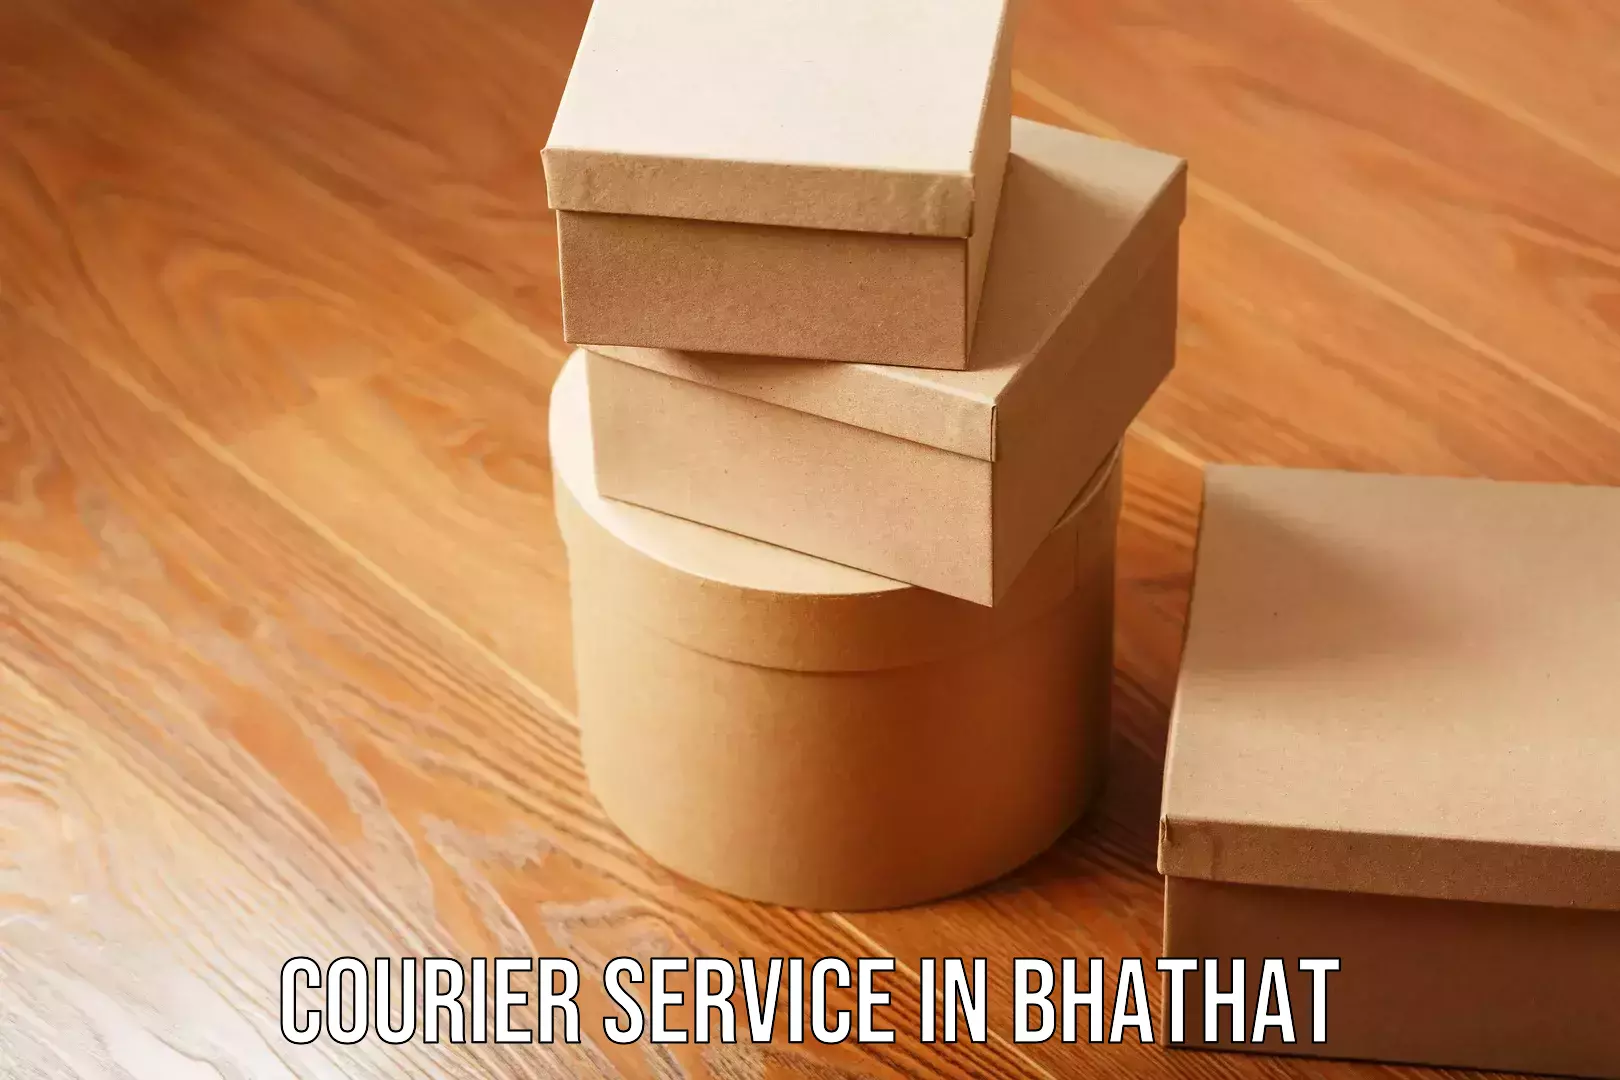 E-commerce shipping partnerships in Bhathat